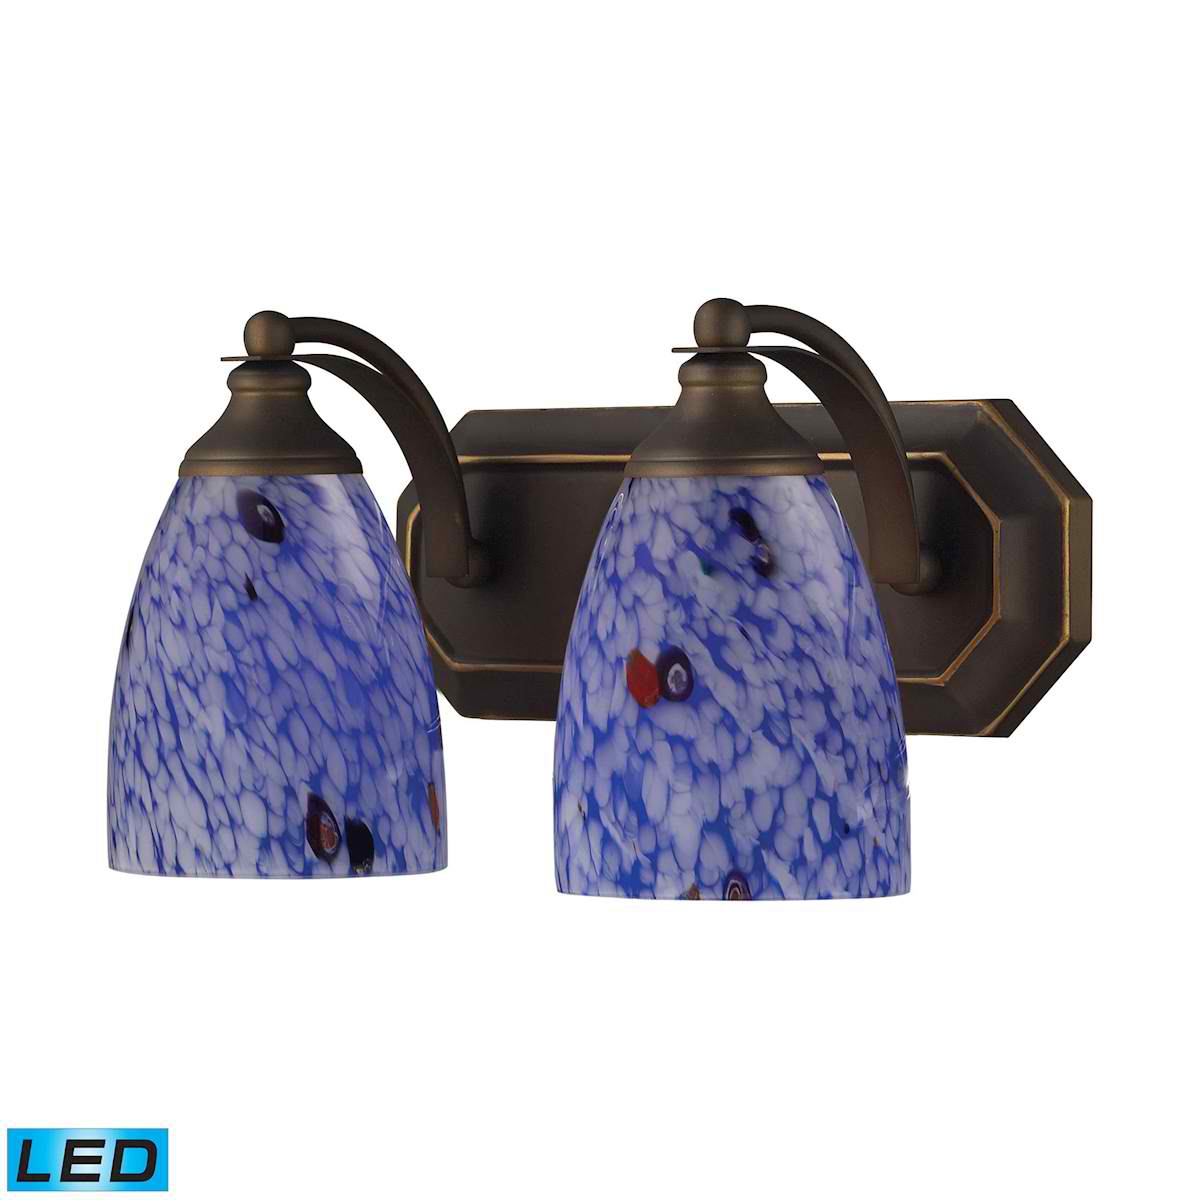 2 Light Vanity in Aged Bronze and Starburst Blue Glass - LED, 800 Lumens (1600 Lumens Total) with Fu